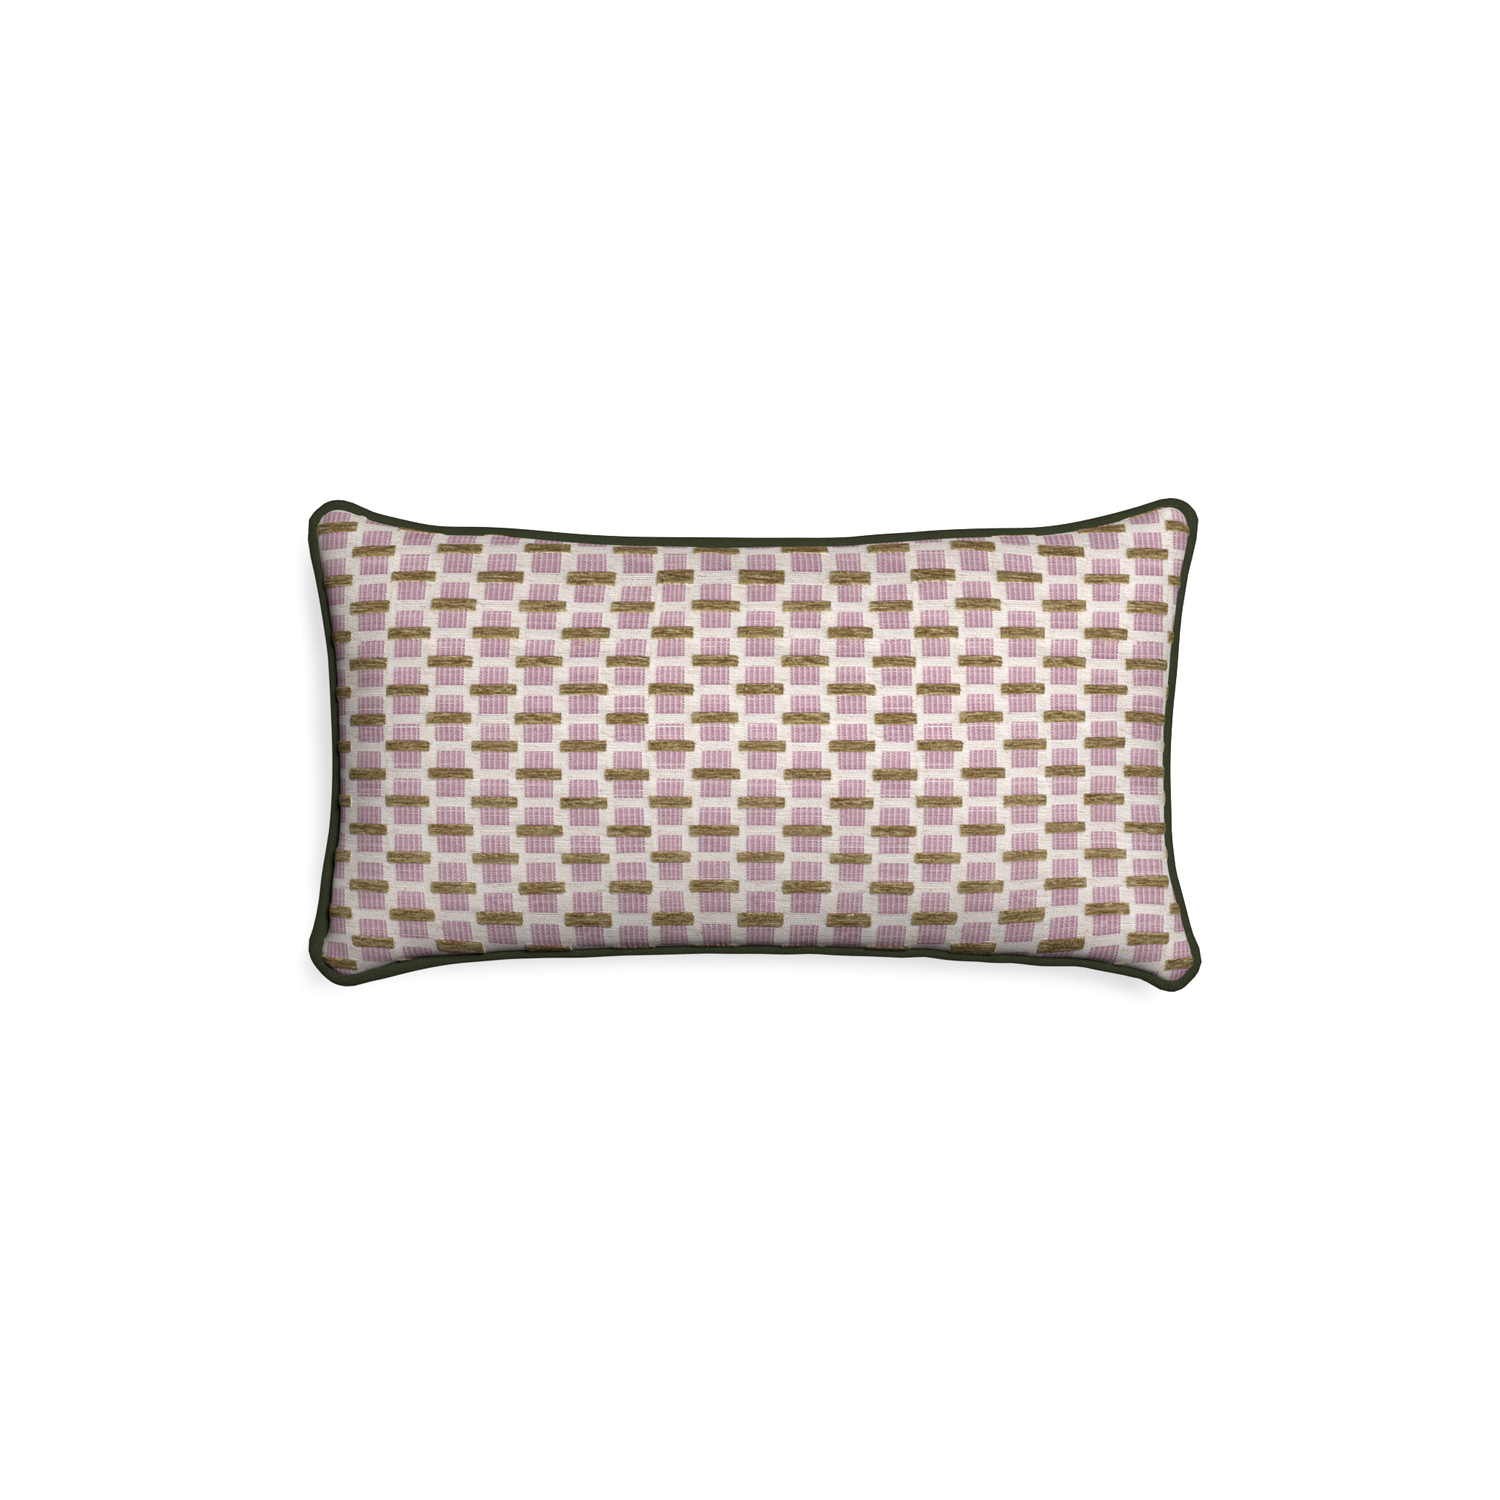 Petite-lumbar willow orchid custom pink geometric chenillepillow with f piping on white background